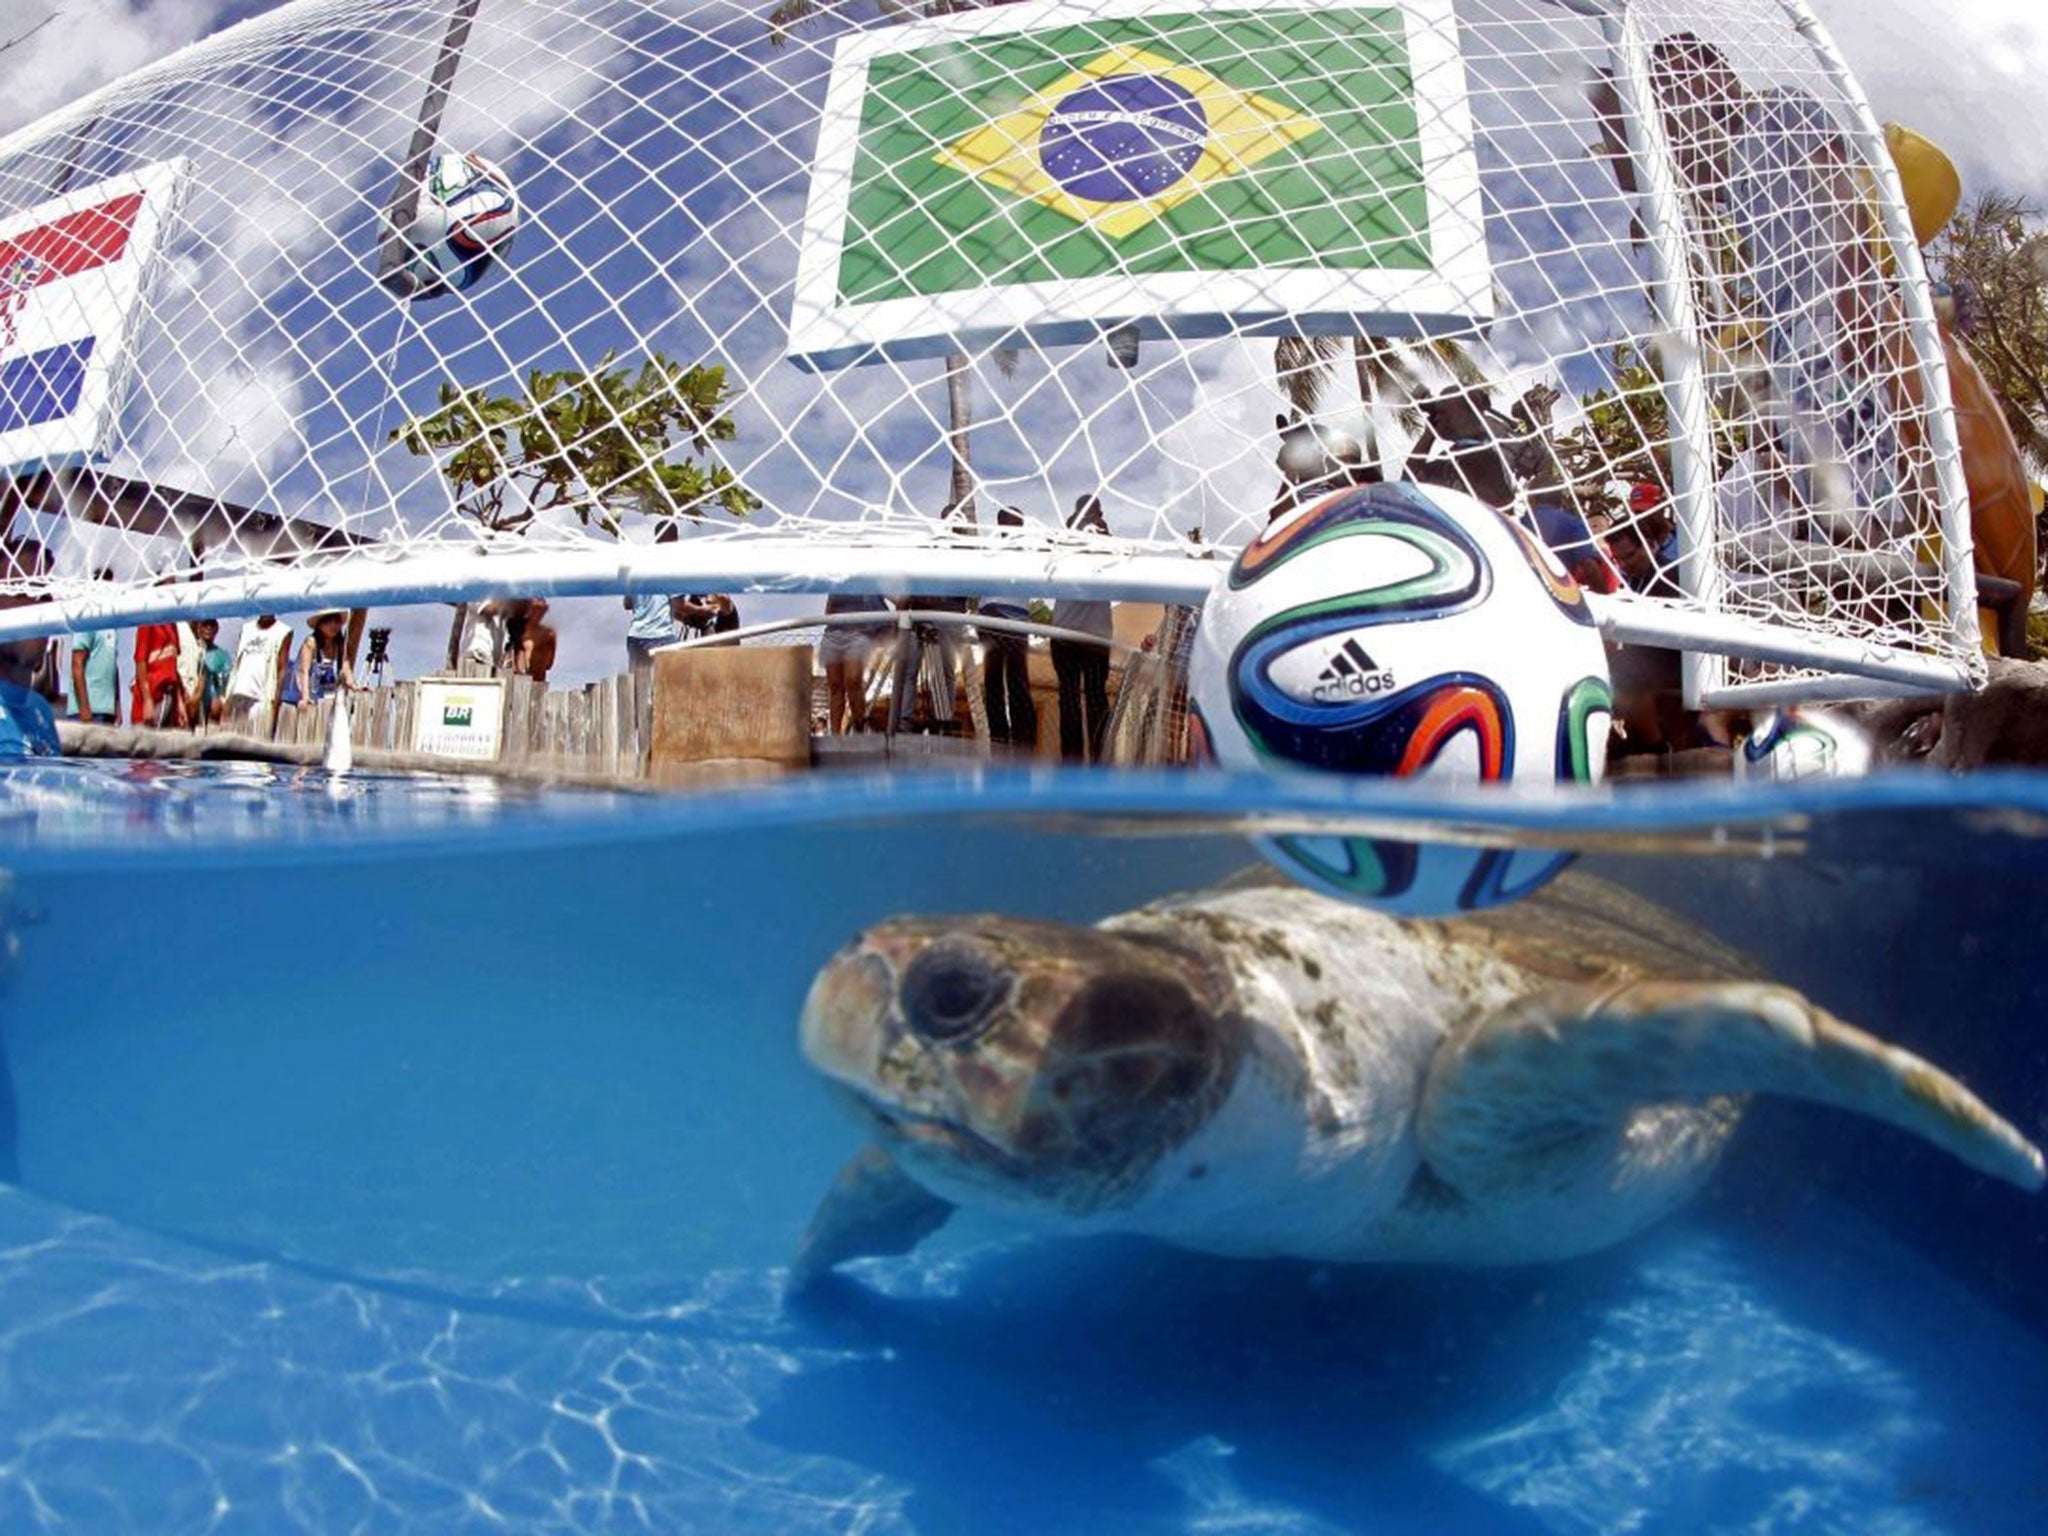 A turtle named "Cabecao," or Big Head, swims in a pool in Praia do Forte, Brazil, Tuesday, June 10, 2014. The turtle, Brazil's answer to German octopus Paul who started the psychic animal craze during the 2010 World Cup, predicted Tuesday that the host na